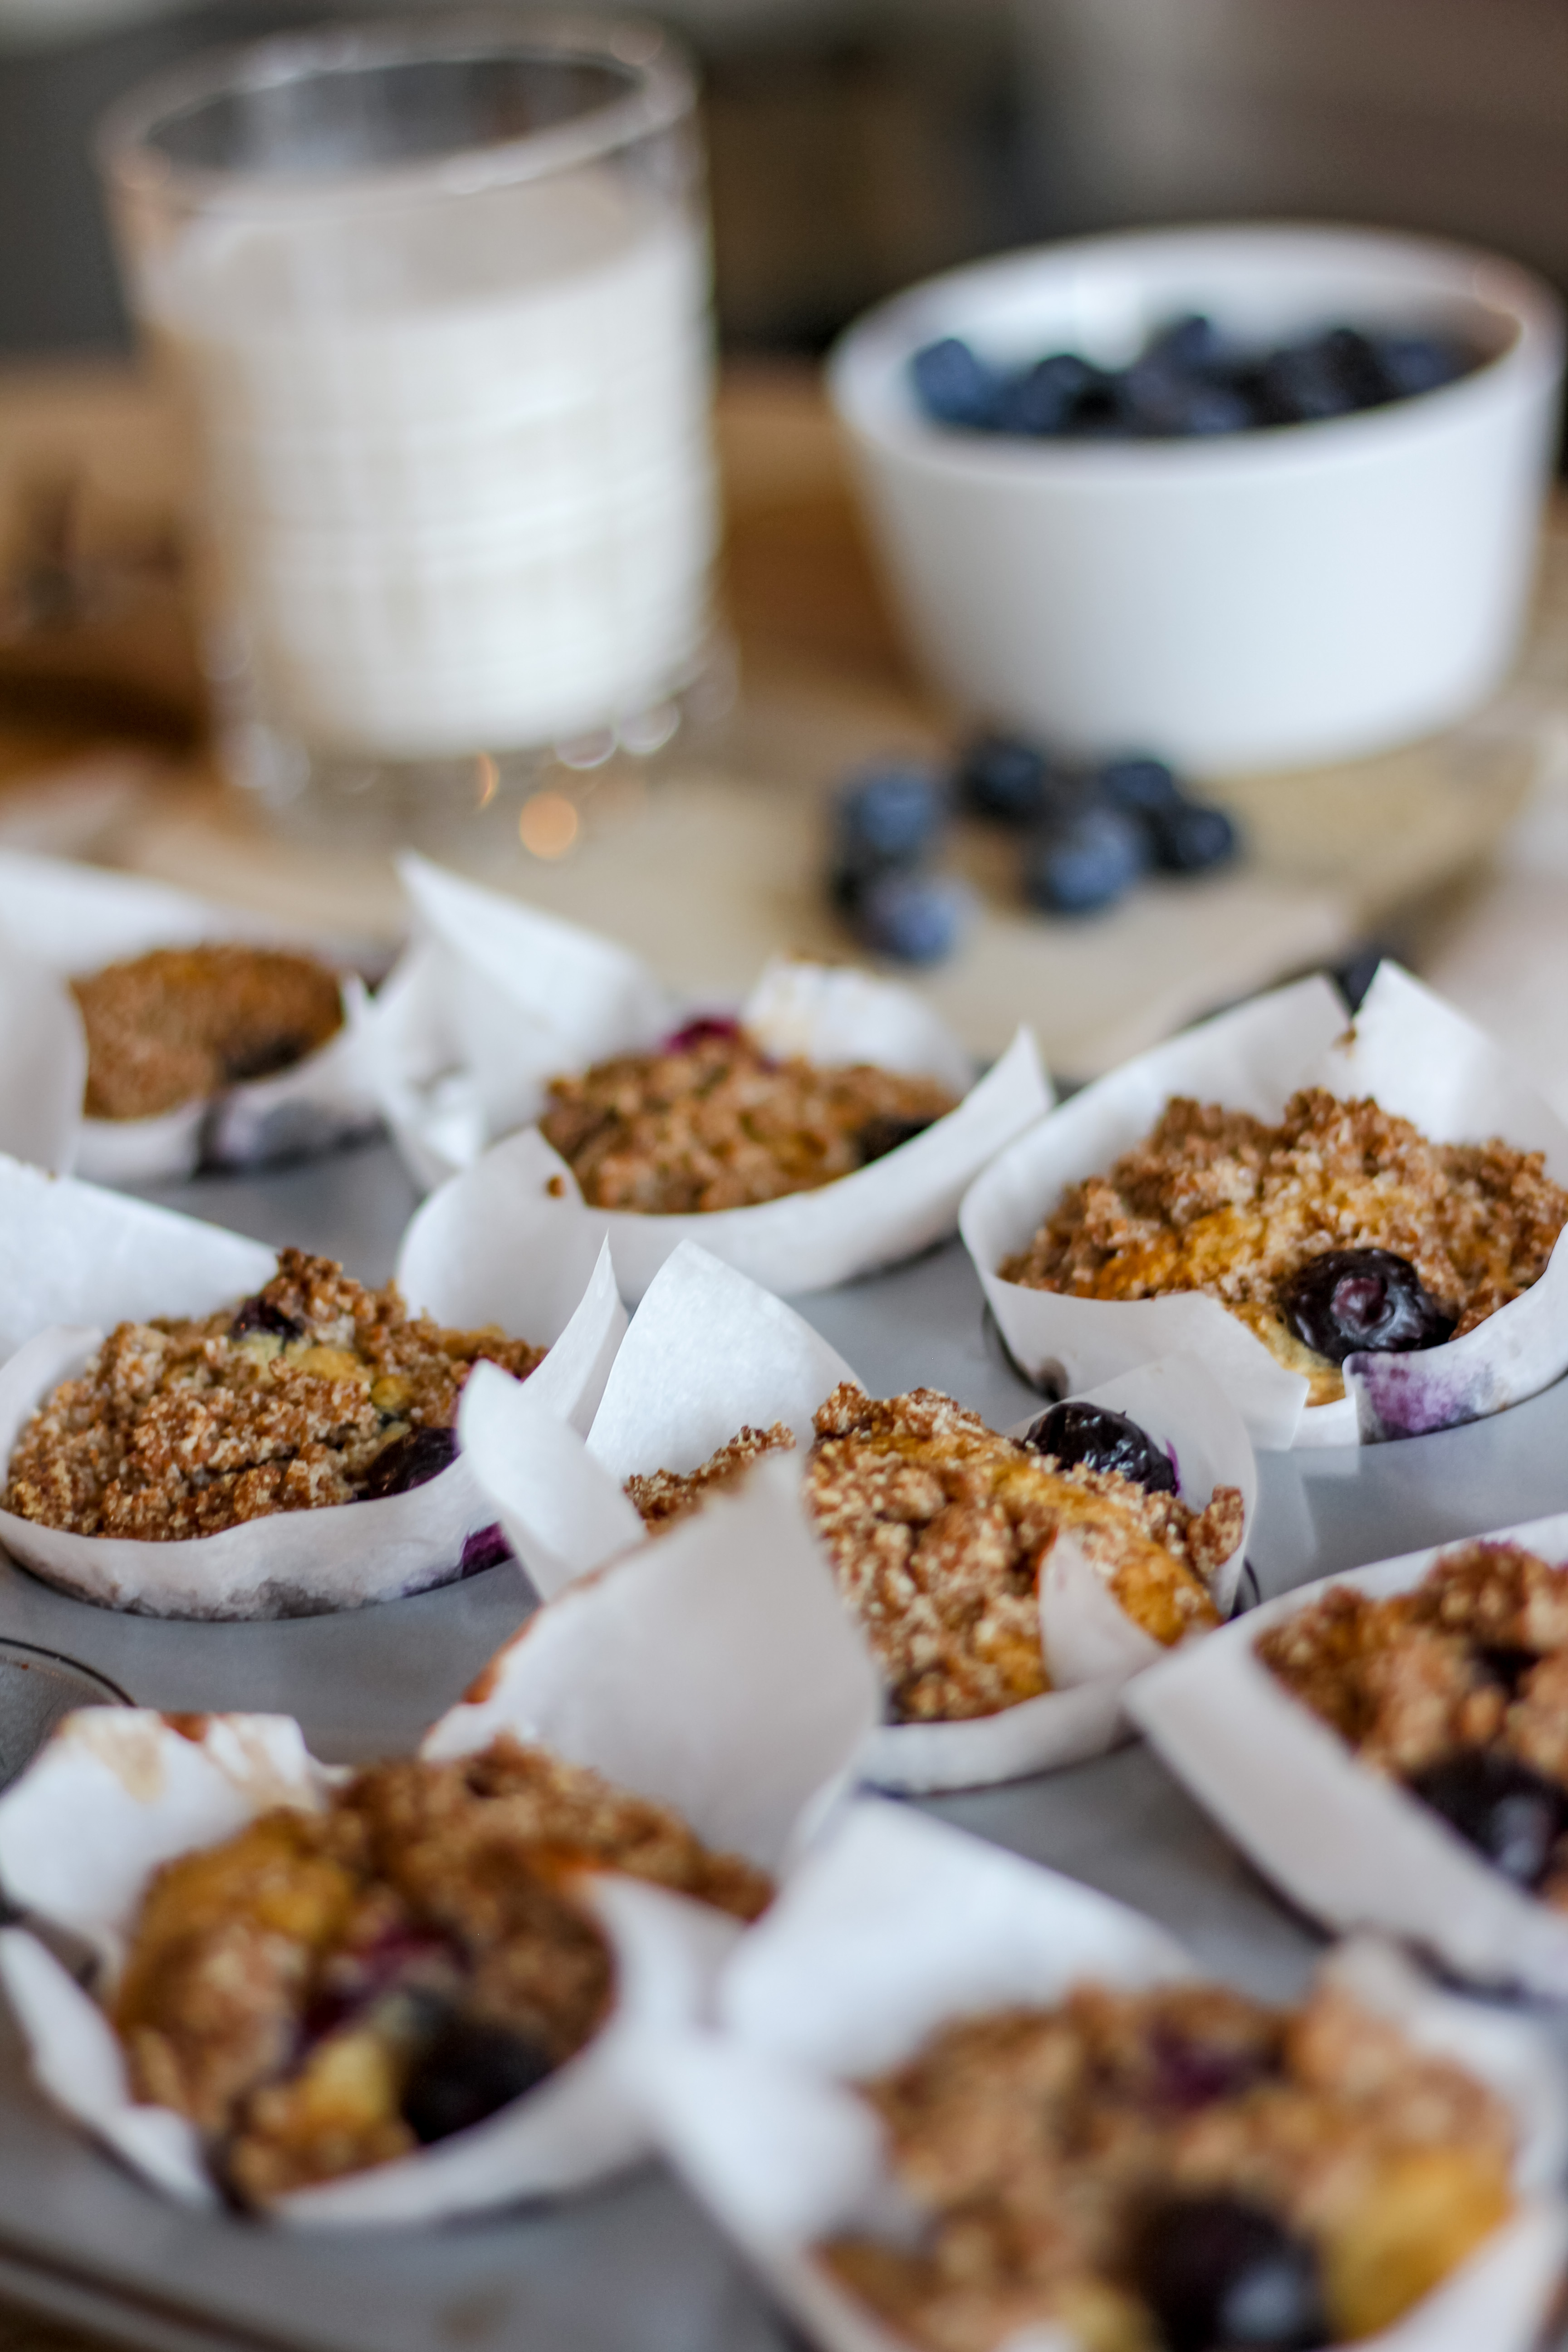 The Best Gluten-Free Oat flour Blueberry Muffins with Cardamom Crumble